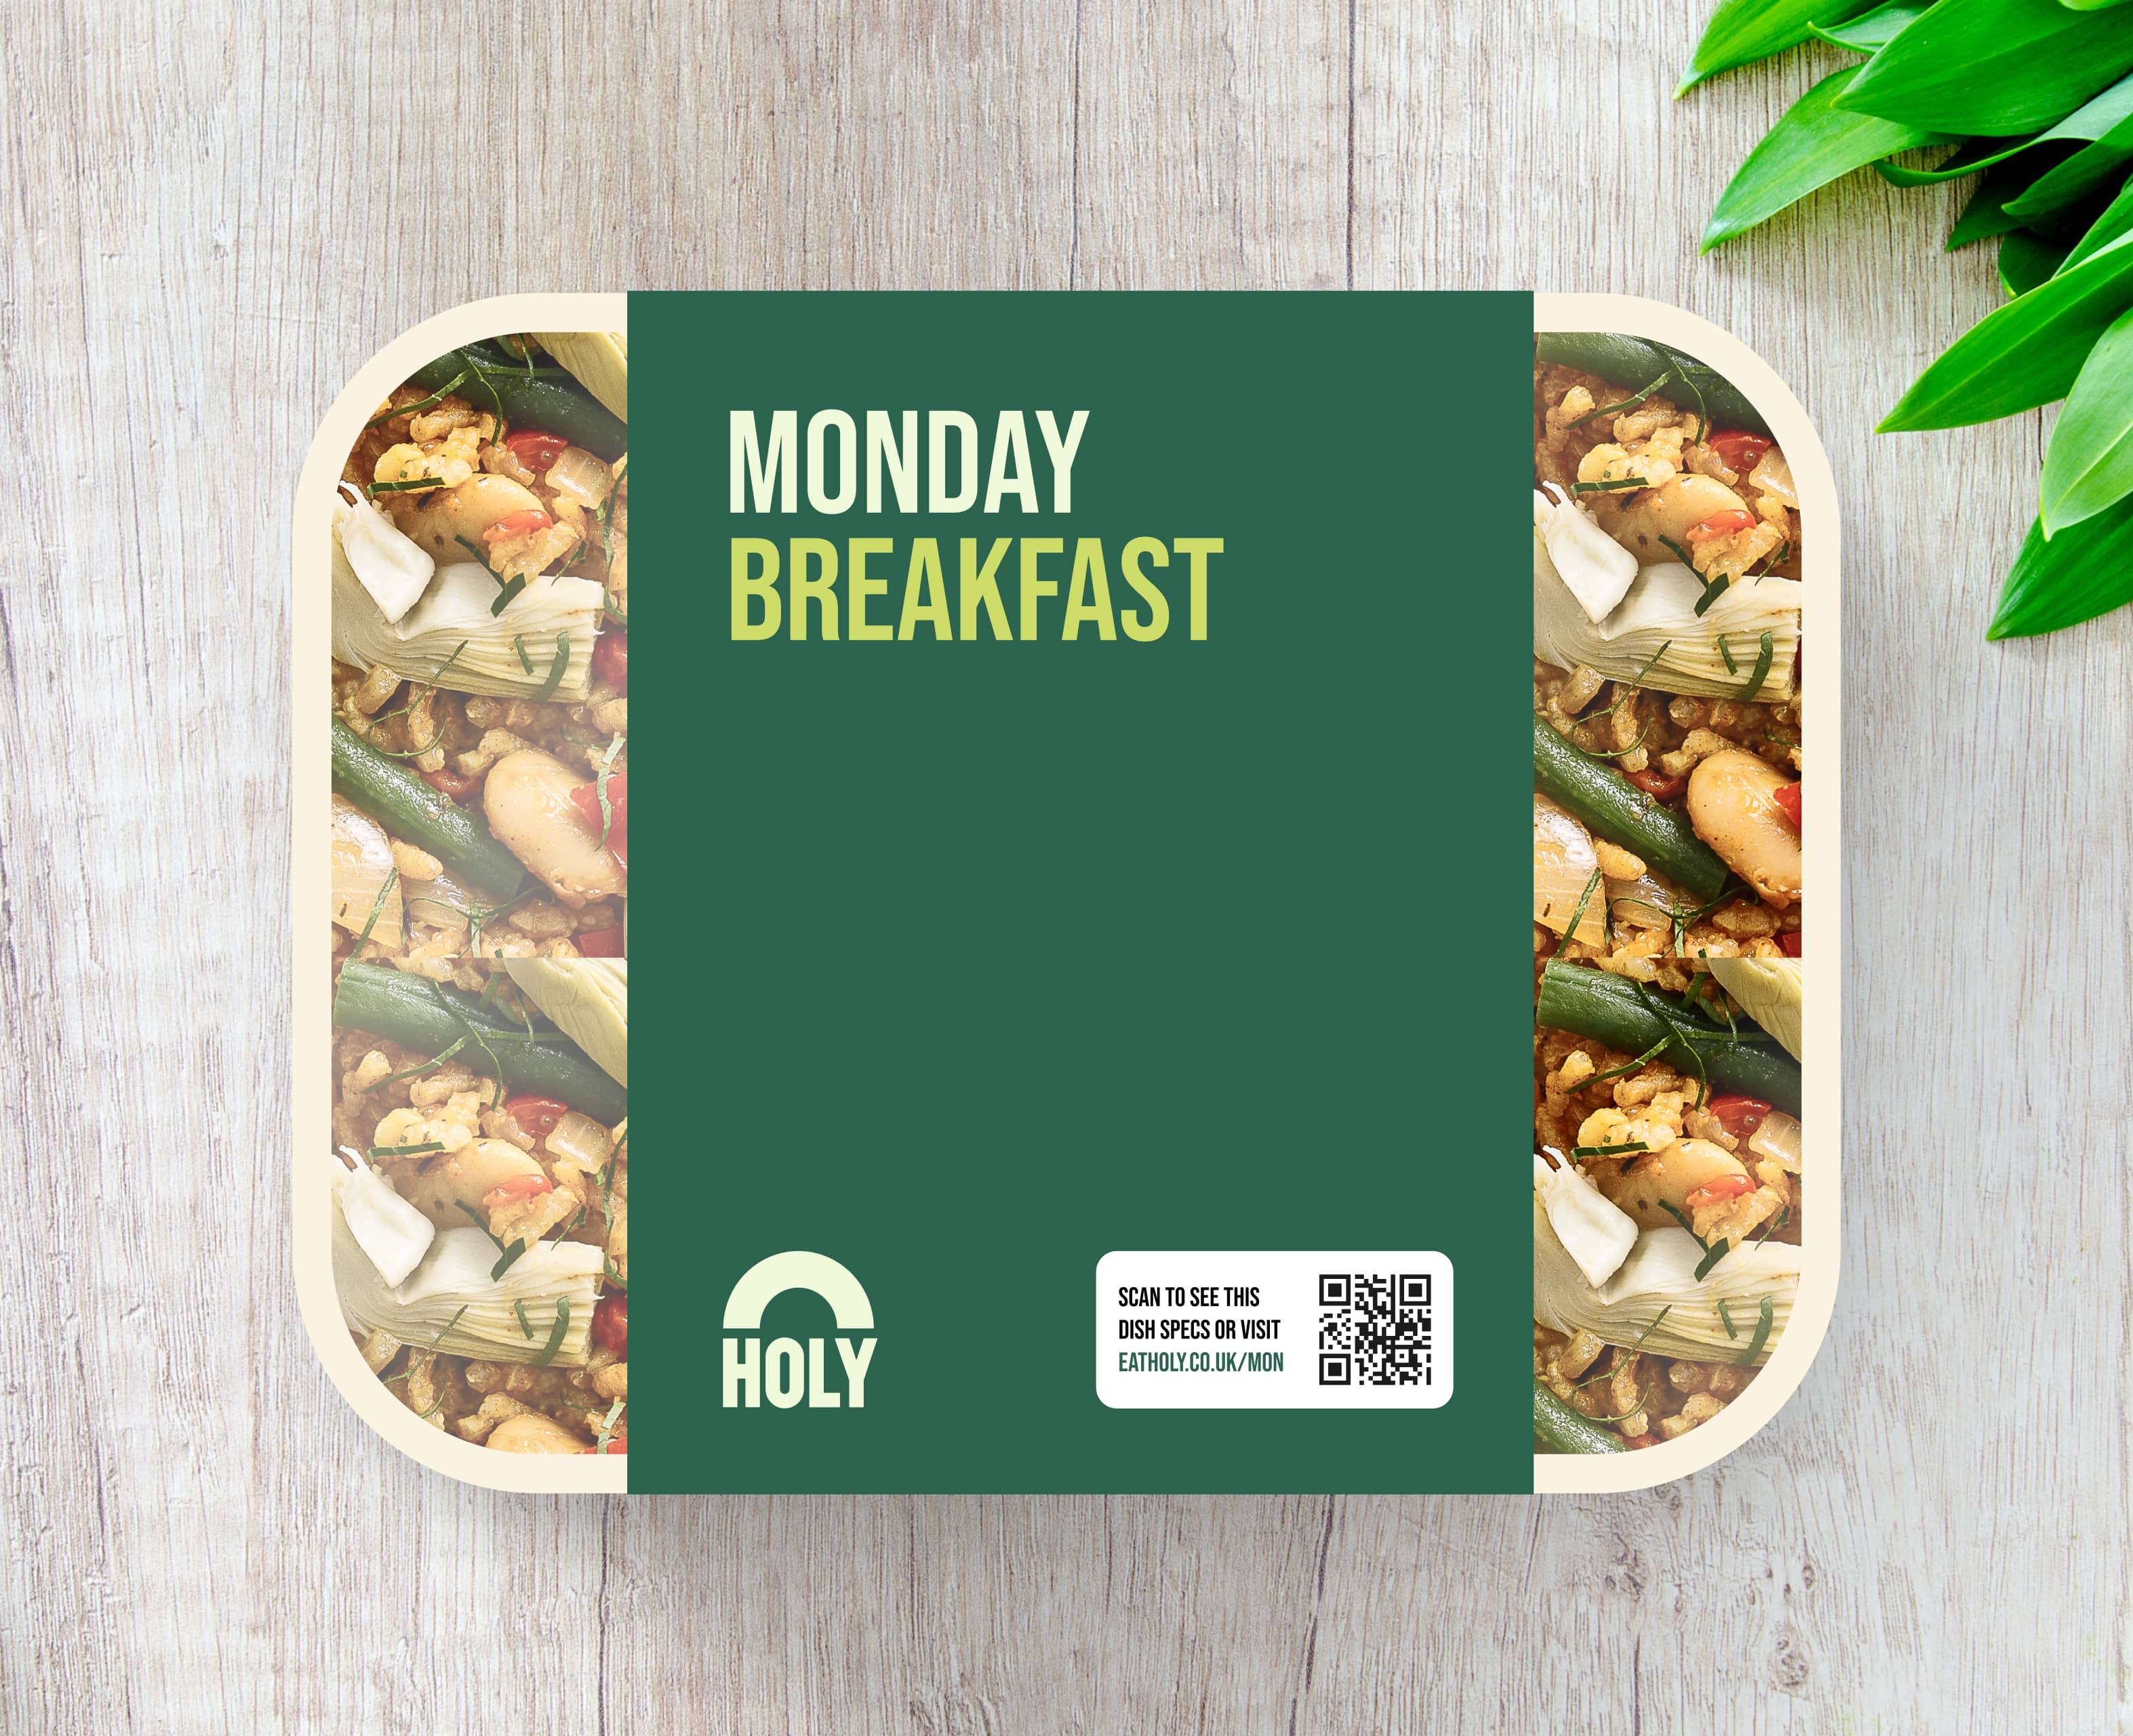 Holy vegan delivery packaging concept